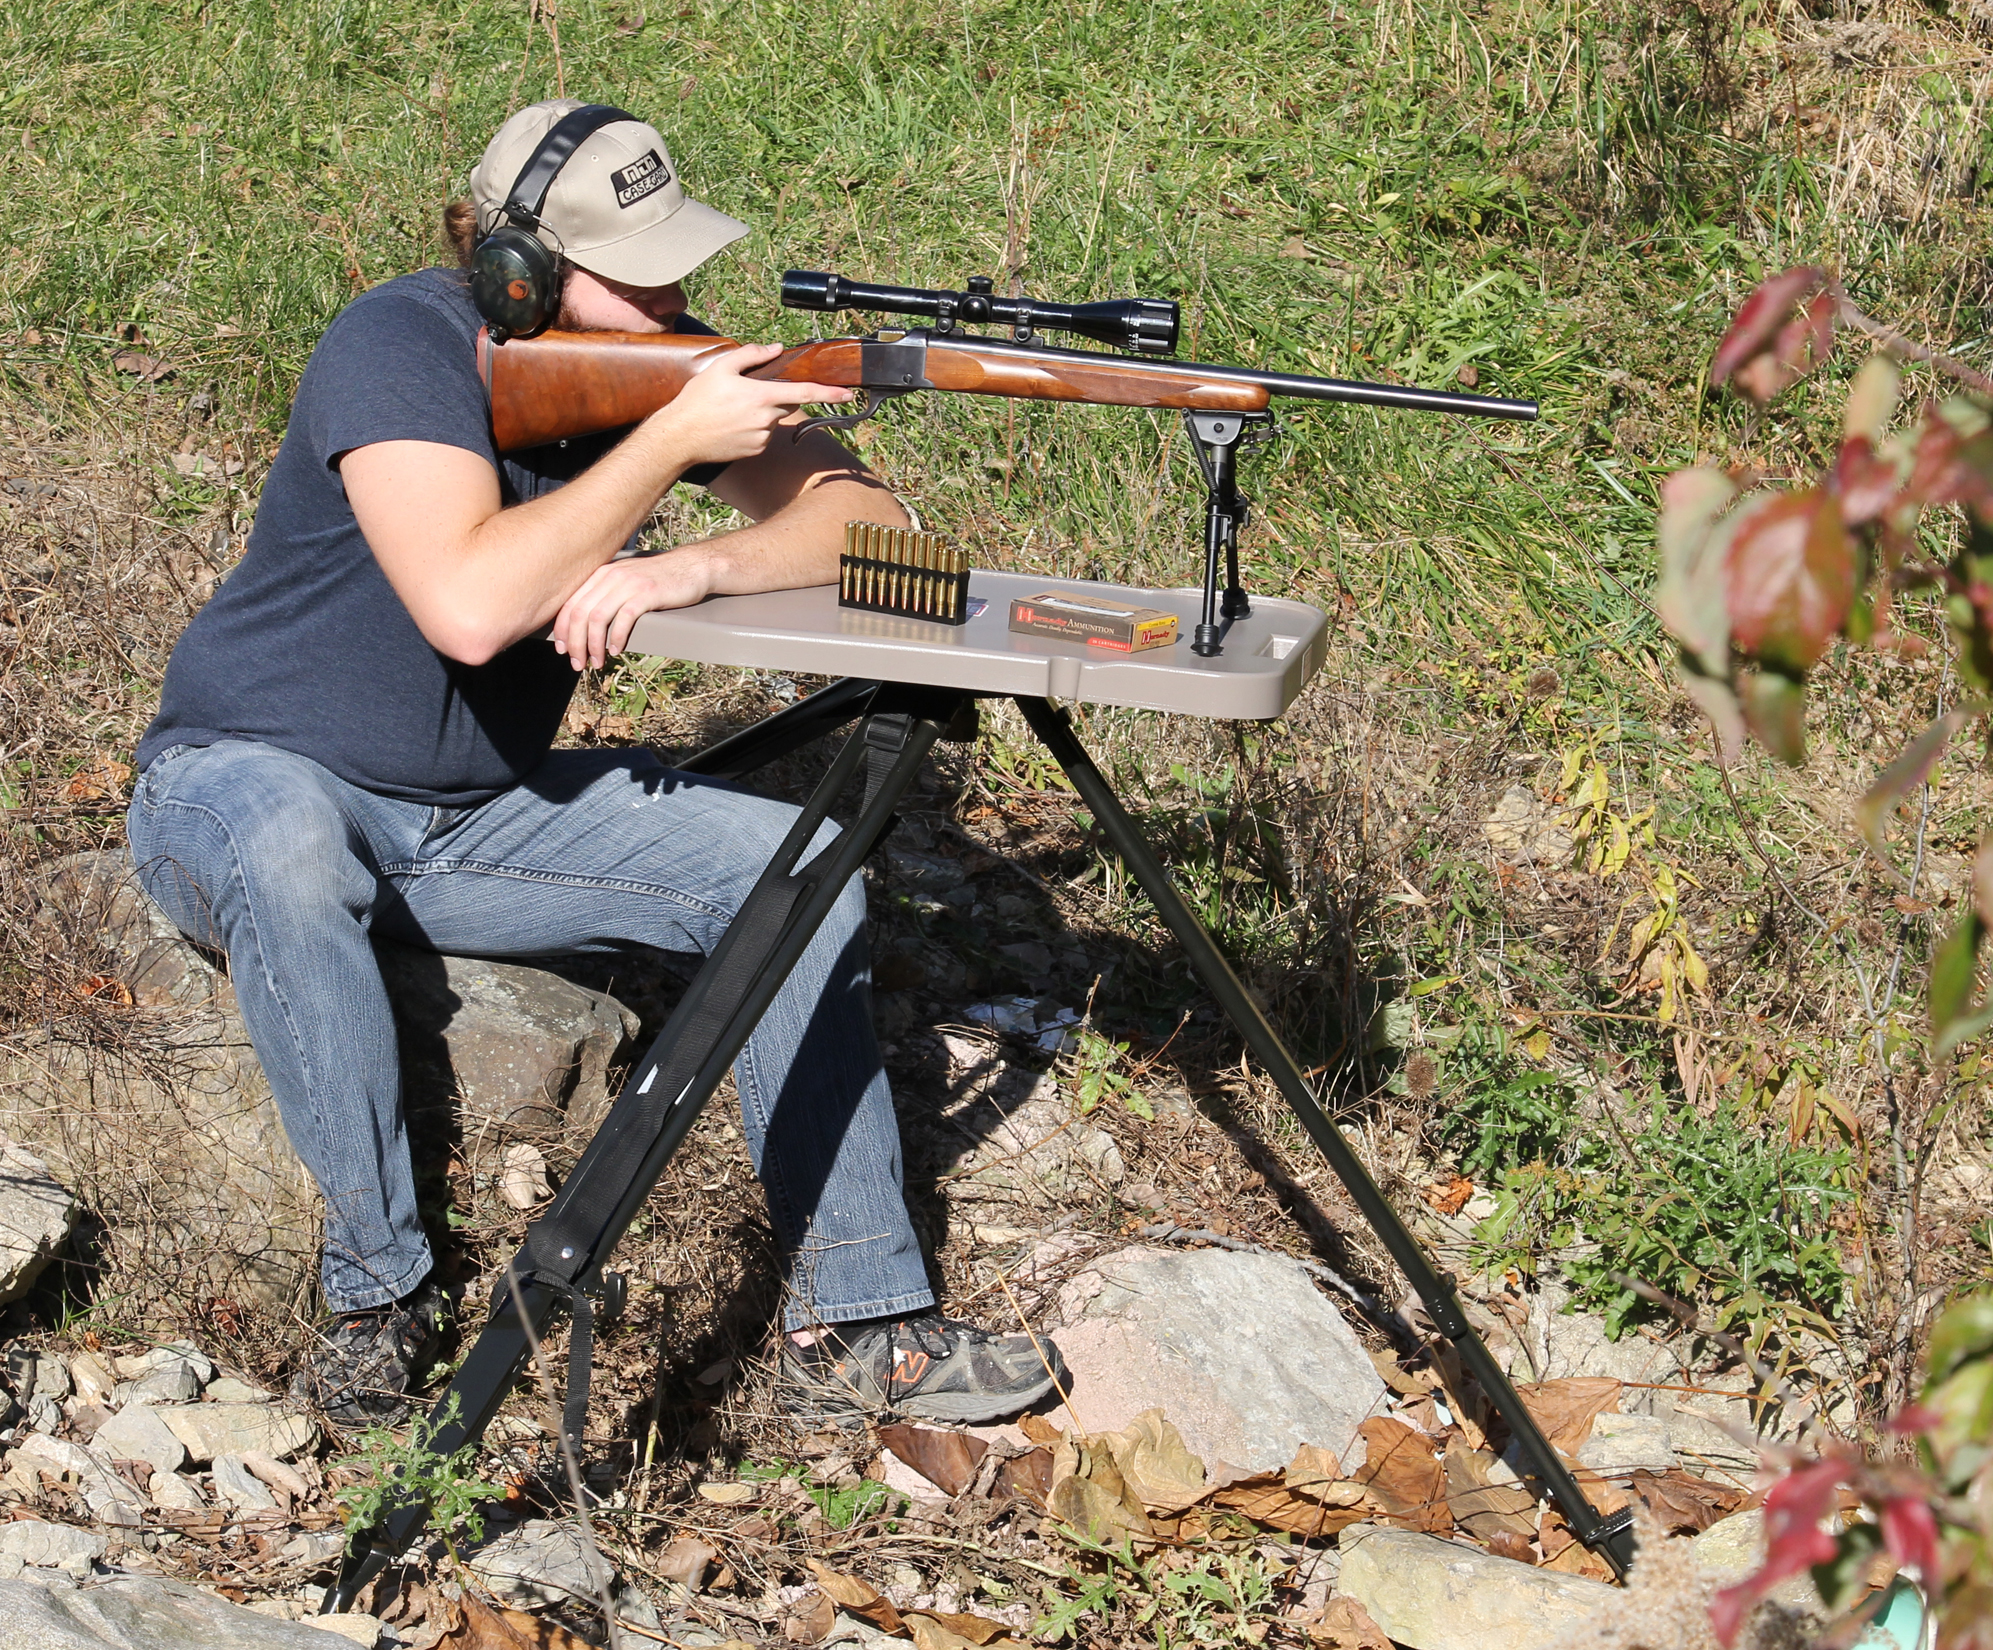 Hot Gear: Portable Shooting Bench Perfect for the Range